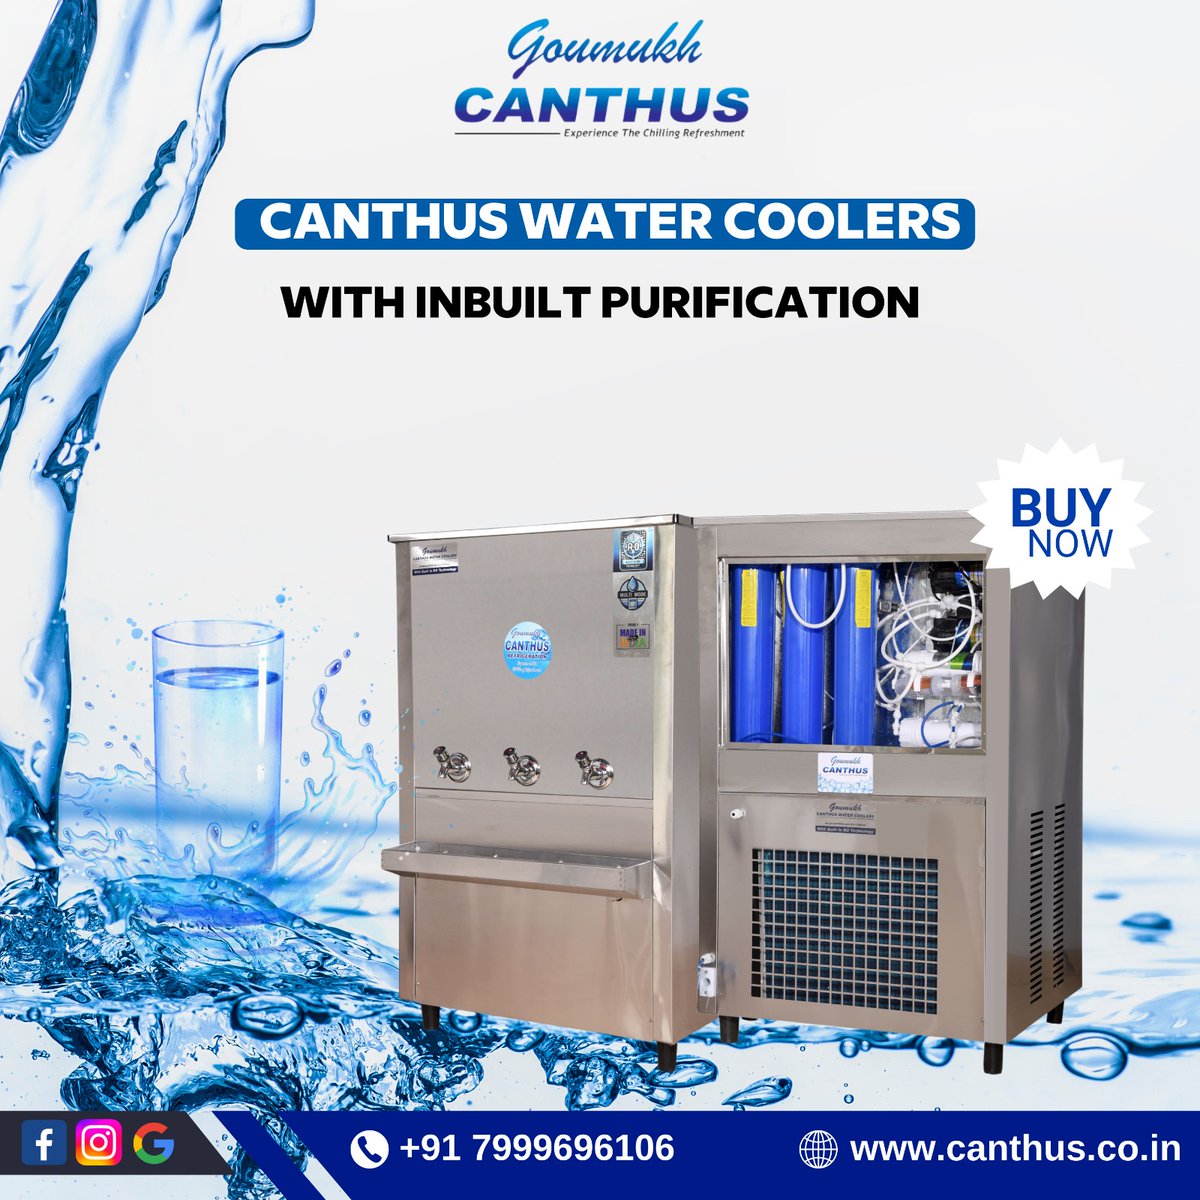 Canthus Water Coolers: Purified refreshment, every time. Stay cool and healthy.
.
.
Contact Us ☎️ +917999696106
.
.
#GoumukhCanthus #IndoreCooling #WaterCooler  #HomeEssentials #PurifiedWater #HealthyHydration #EnergySaving #CanthusWaterCoolers #CanthusCoolers #indore